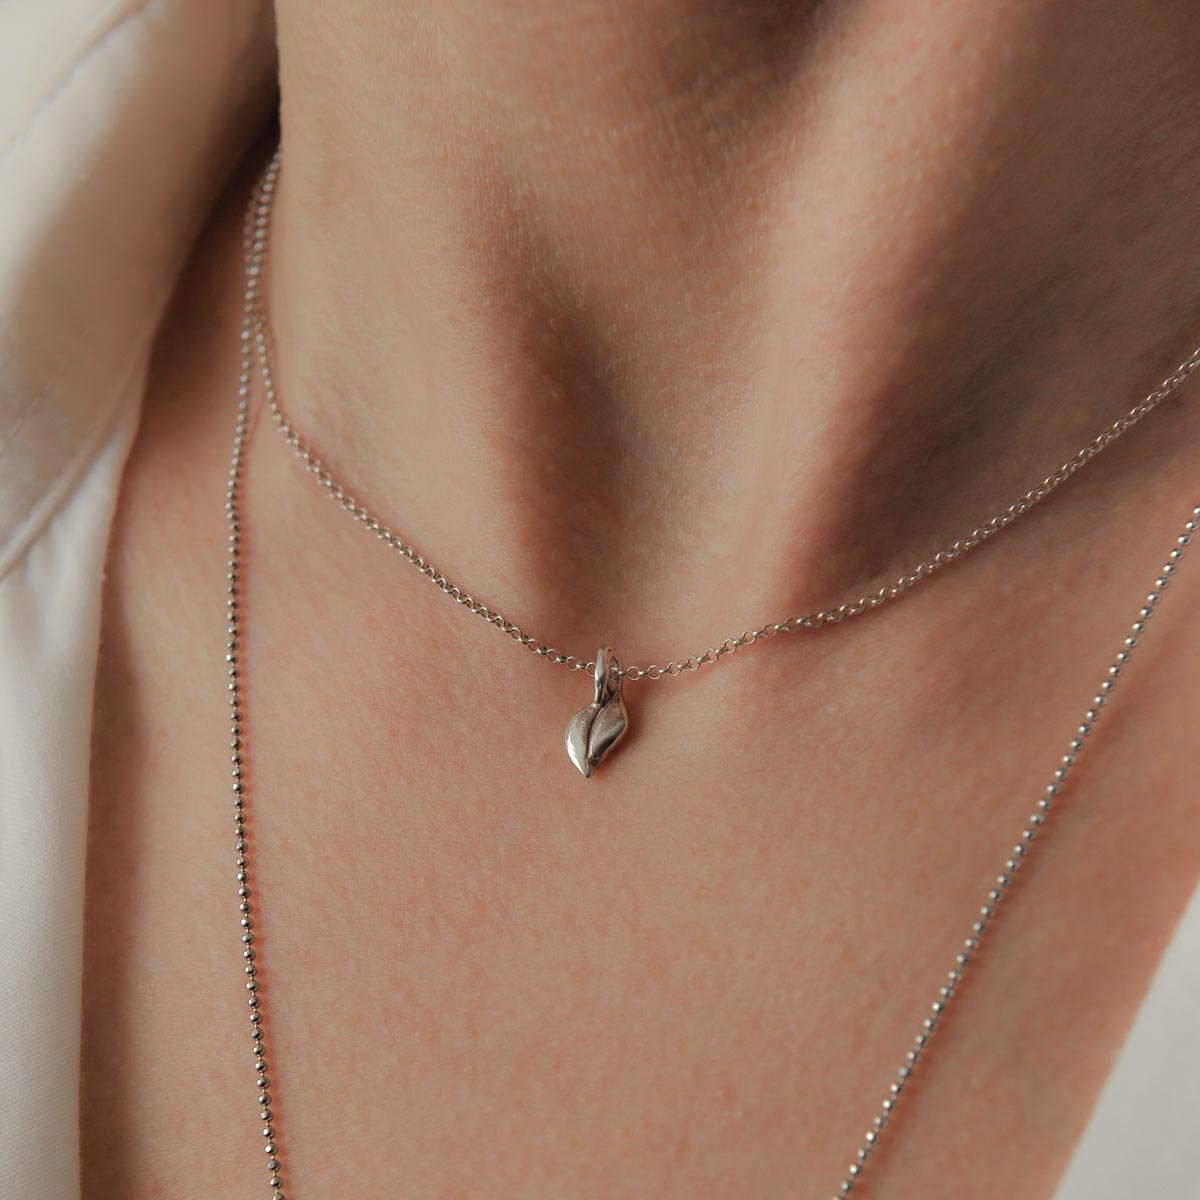 Tiny leaf necklace, sterling silver. Design and handmade for Bead A Boo jewelry by Katerina Glinou.